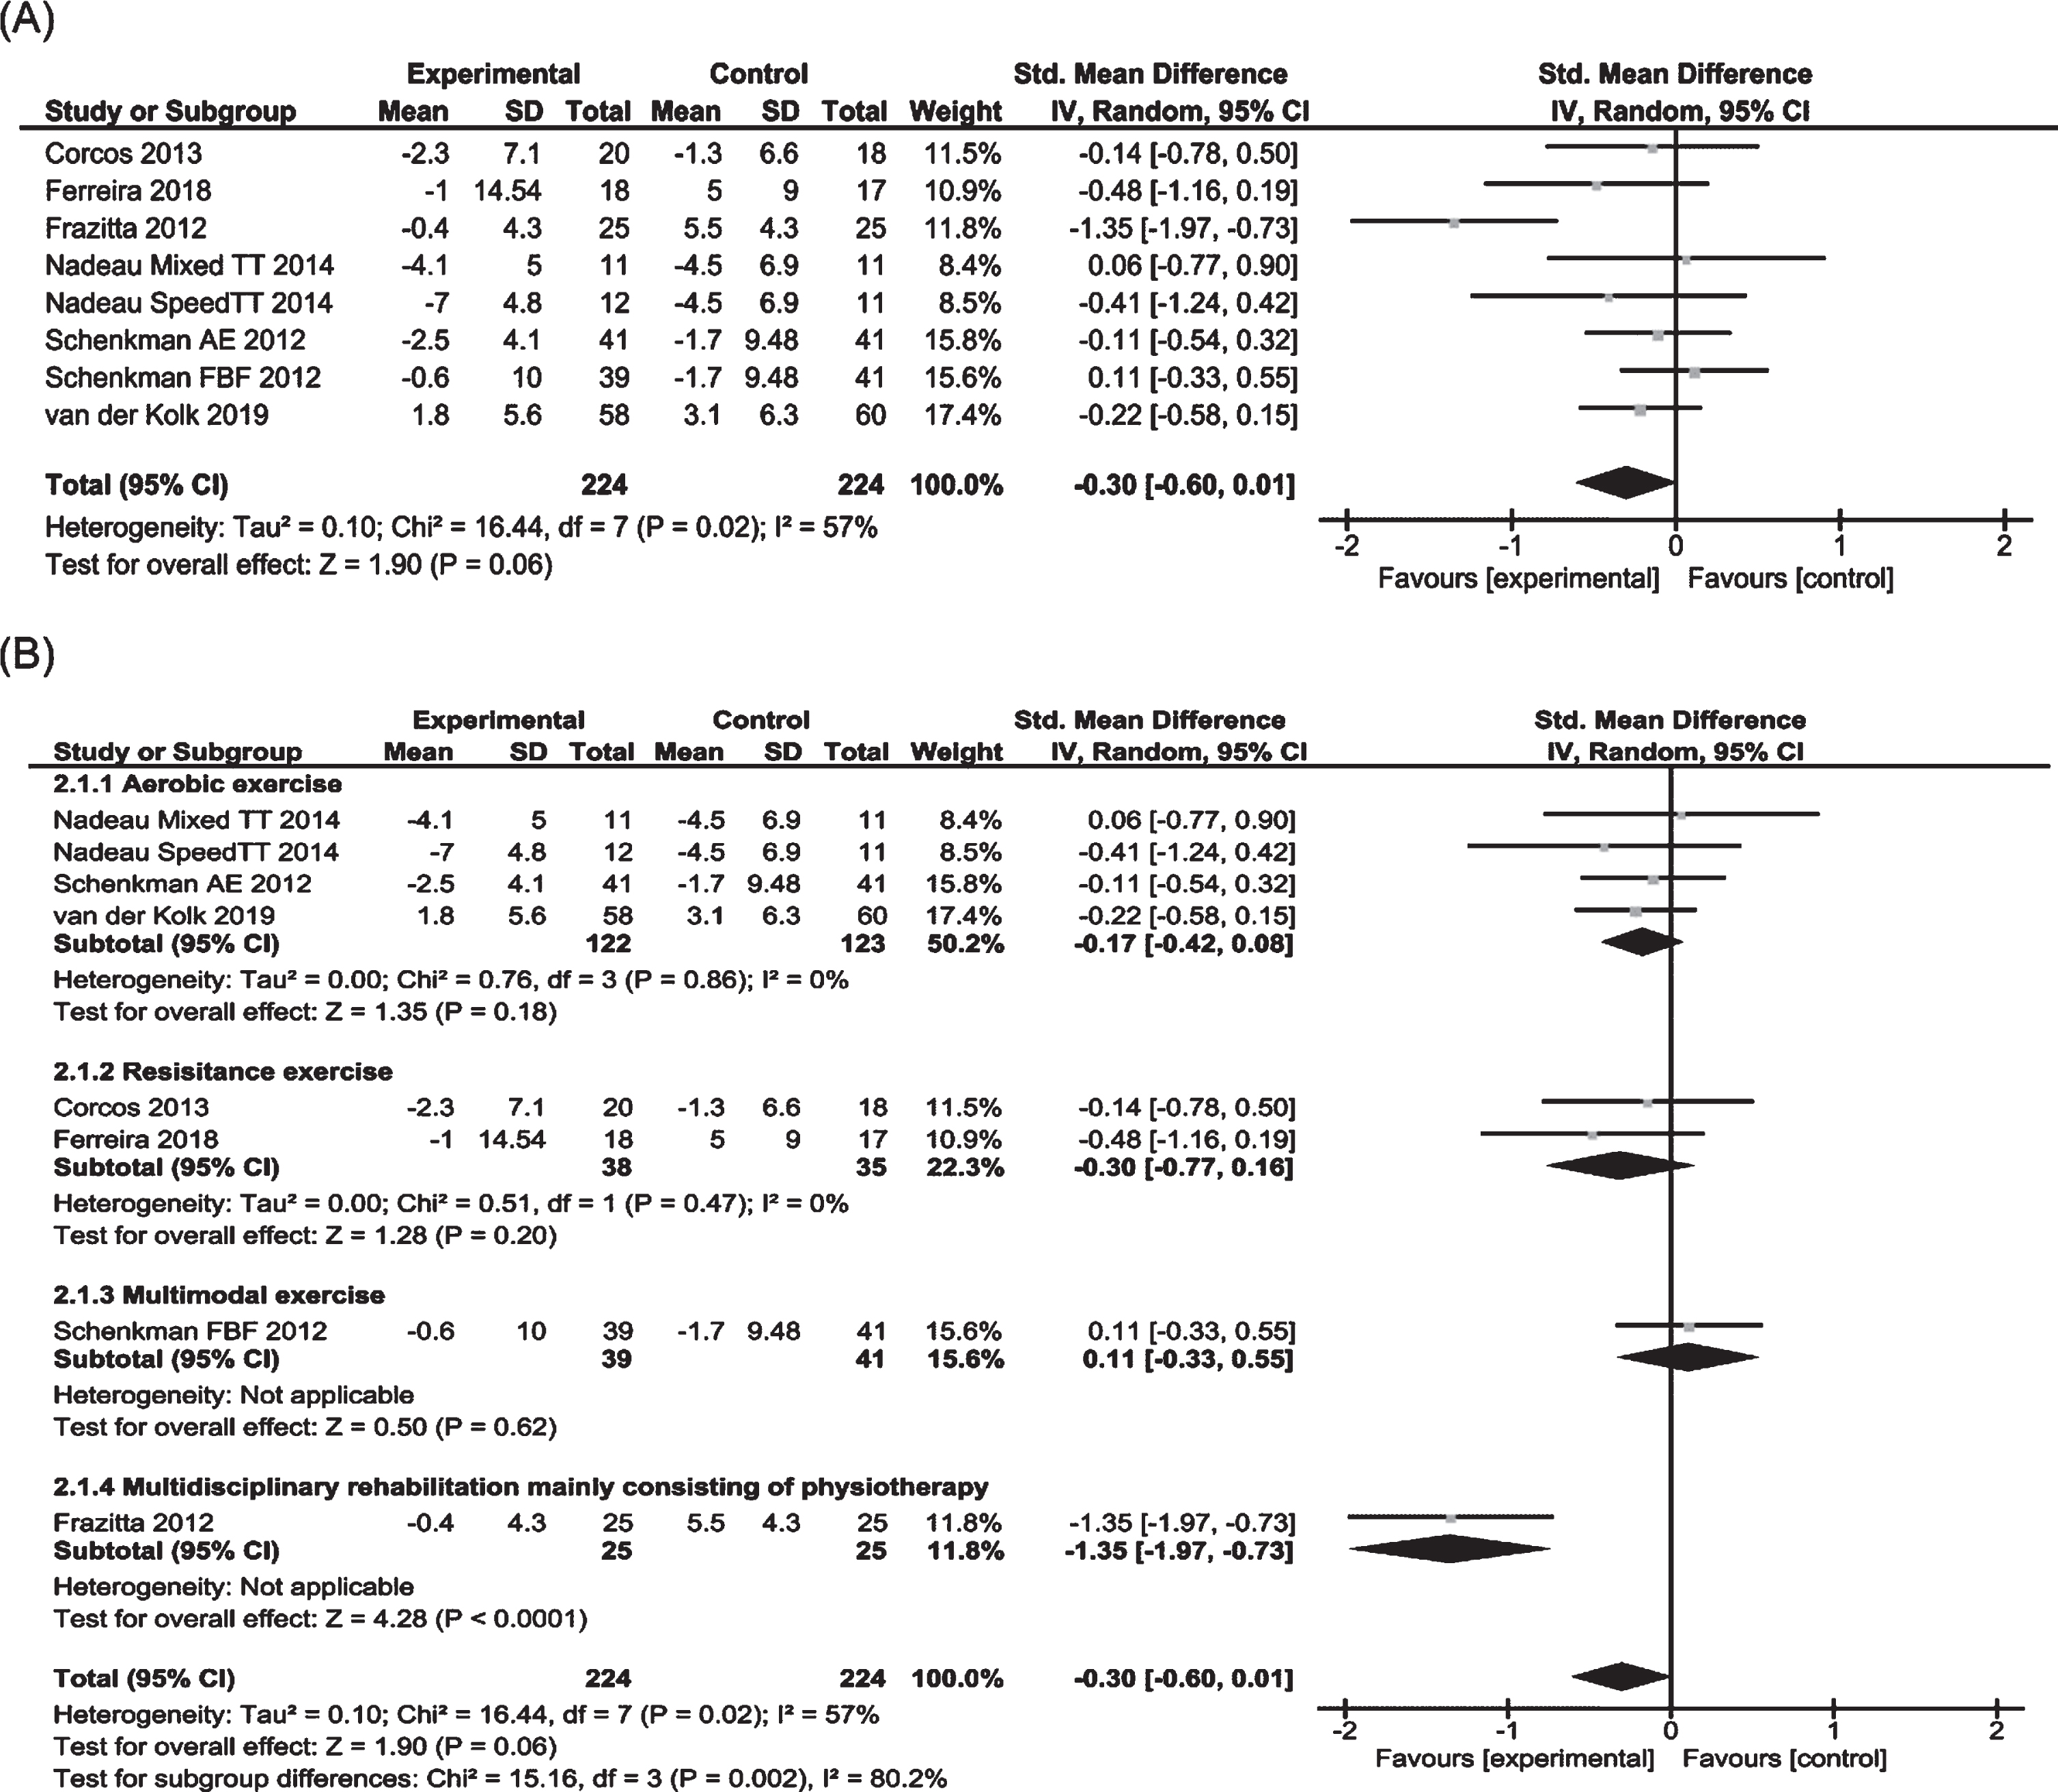 Forest plots of MDS-UPDRS/UPDRS motor score in on medication state for physiotherapy versus no/control intervention. (A) Overall effect of physiotherapy interventions. (B) Subgroup analysis (category of intervention).